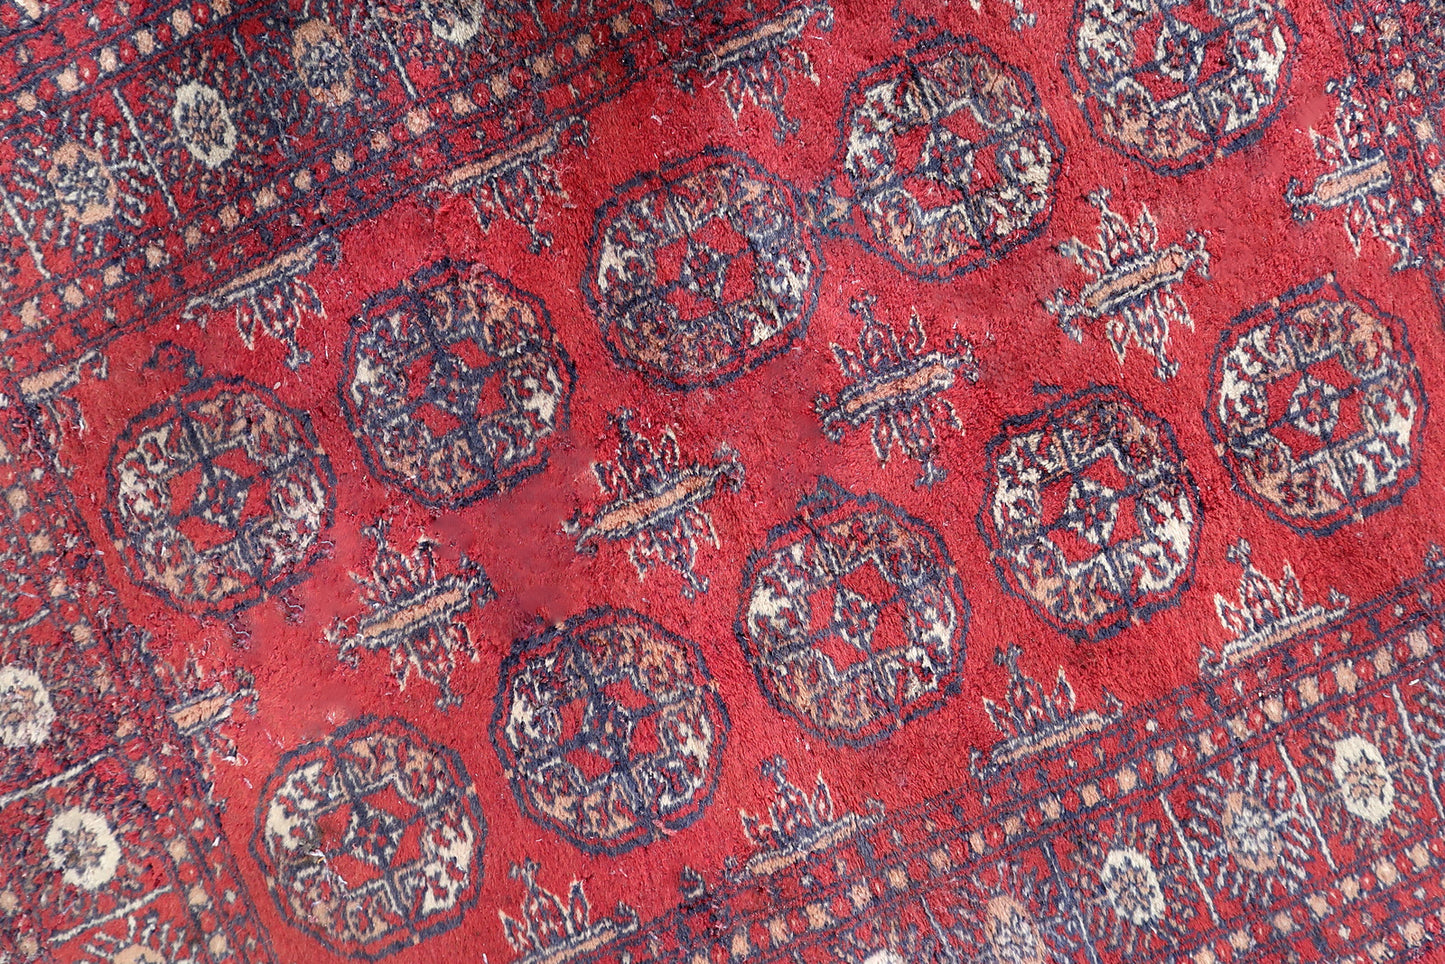 Handmade vintage Uzbek Bukhara rug in bright red color. The rug is from the end of 20th century in good condition, it has some signs of age and old restorations.